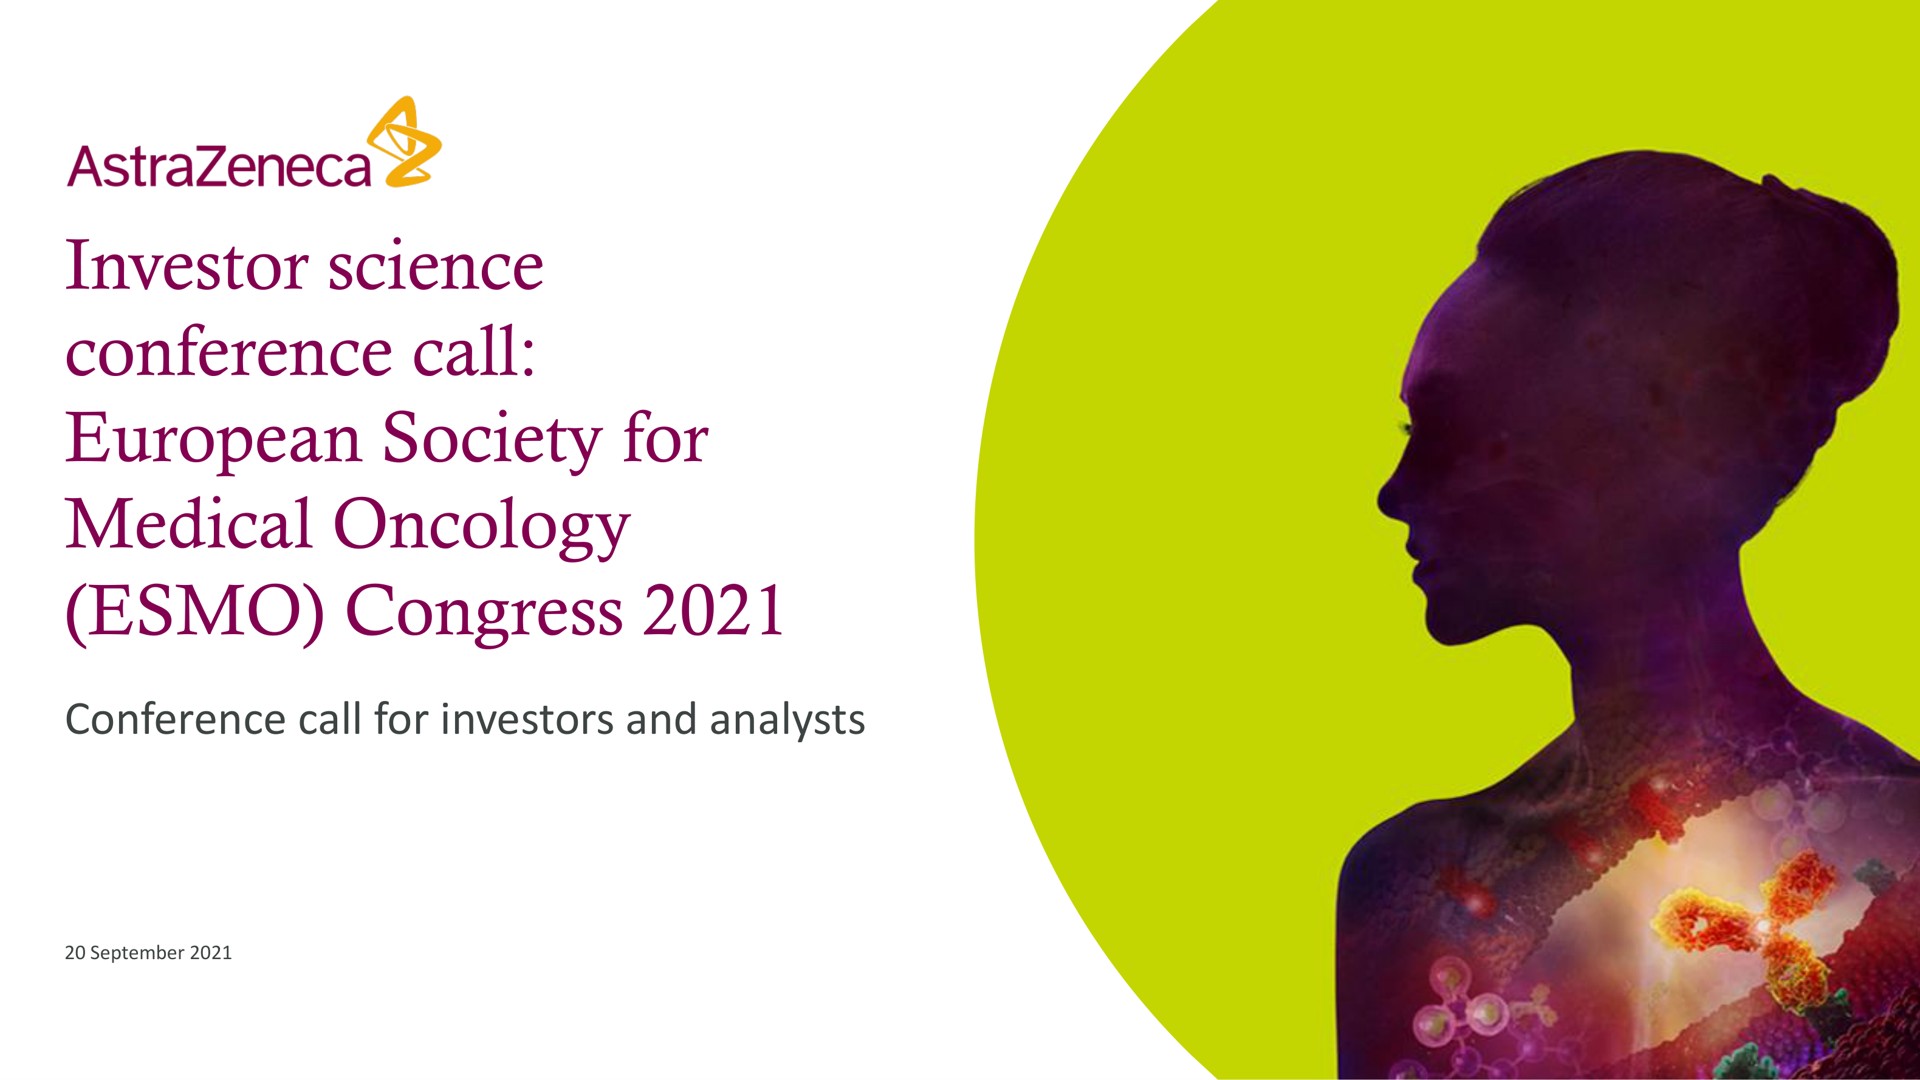 investor science conference call society for medical oncology congress | AstraZeneca